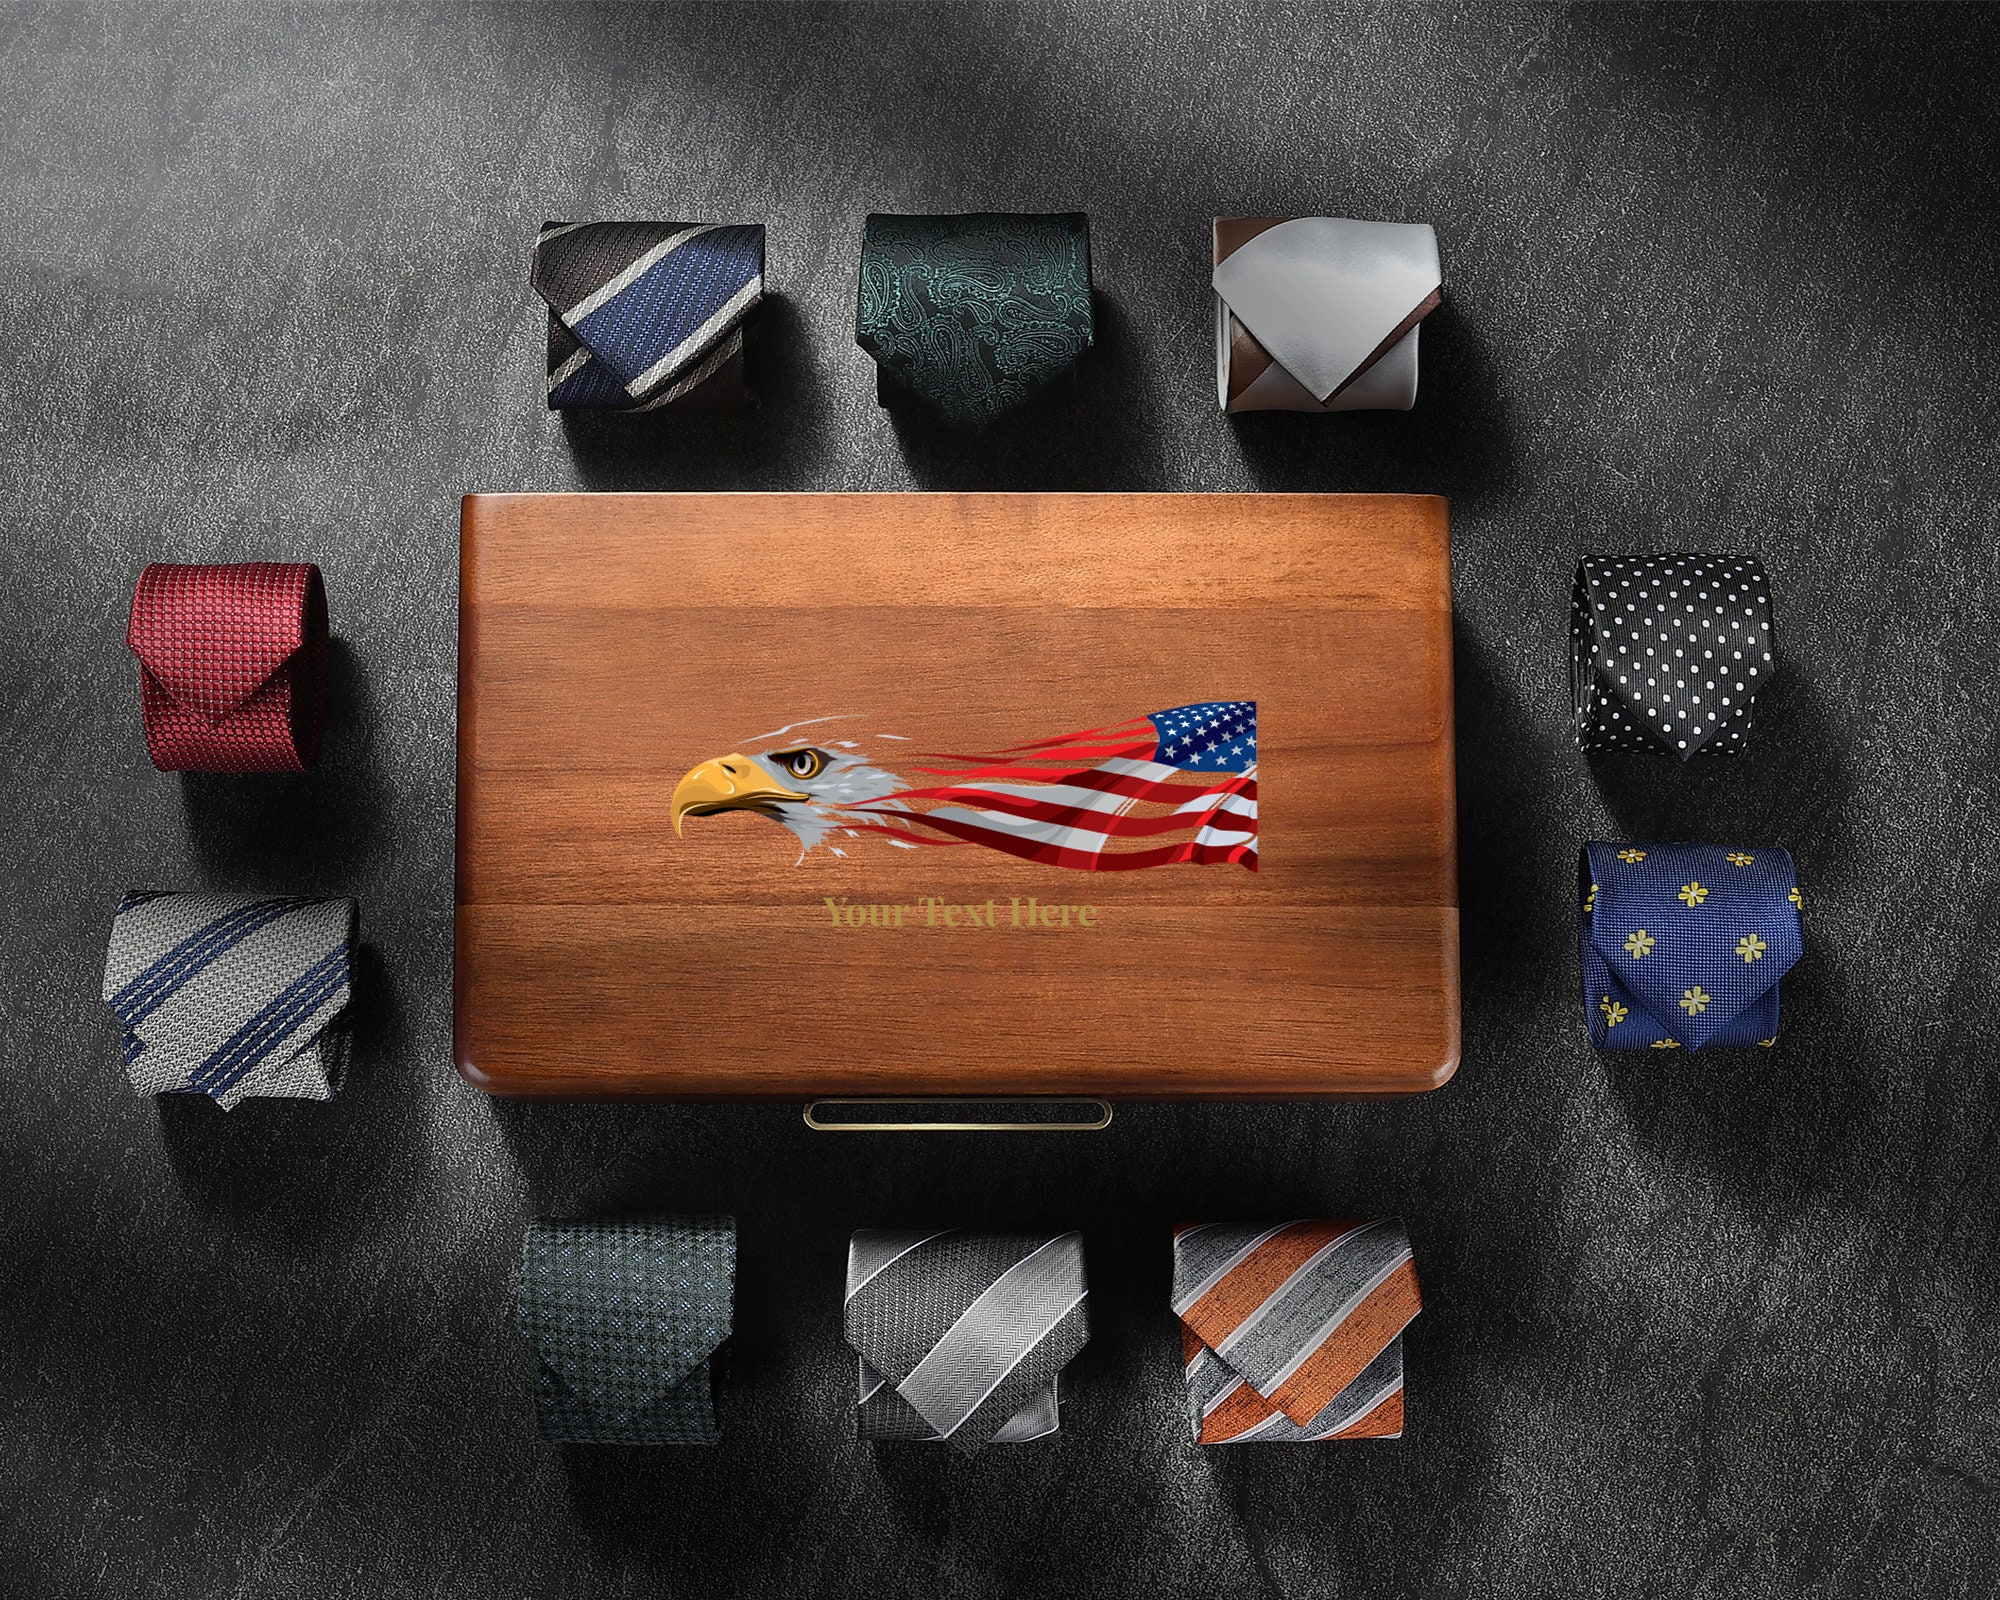 Luxury Tie Organizer, Decorative Storage Box for 8 Ties, Personalized Wood  Box With Lid, Custom Gift for Boss Male, Retirement or Promotion 